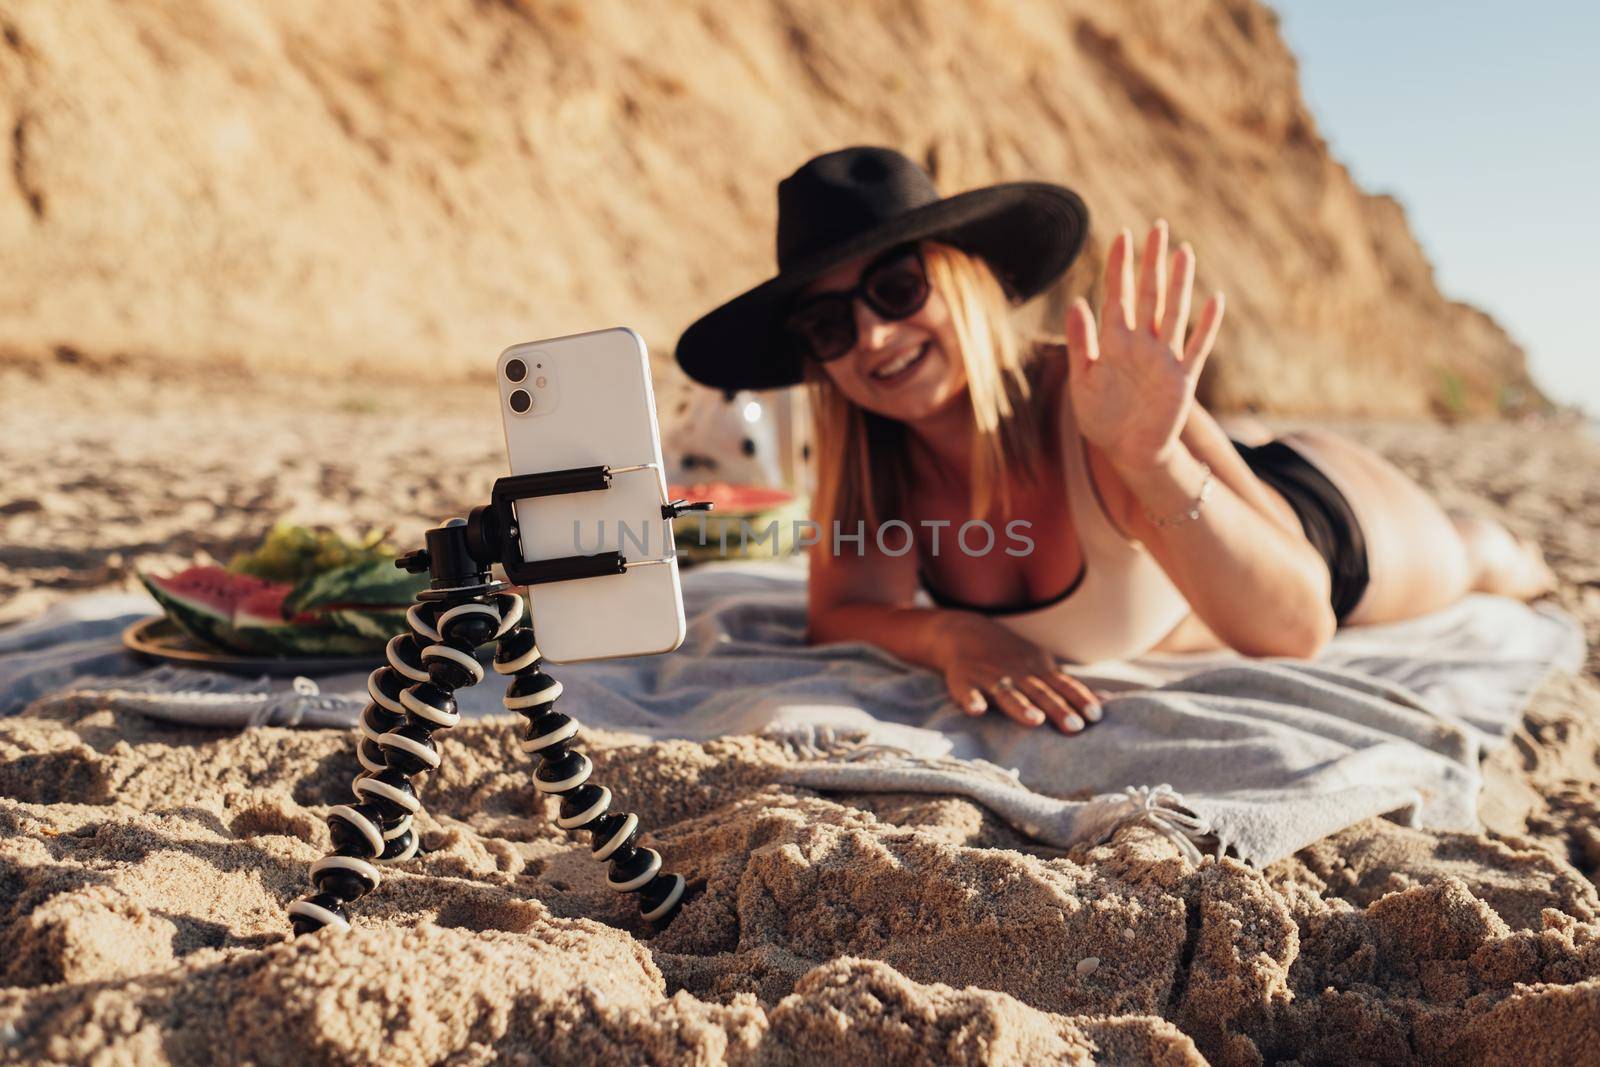 Smartphone Attached on Tripod in Focus, Young Woman Filming Herself on Mobile Camera While Enjoying Vacation by the Sea by Romvy